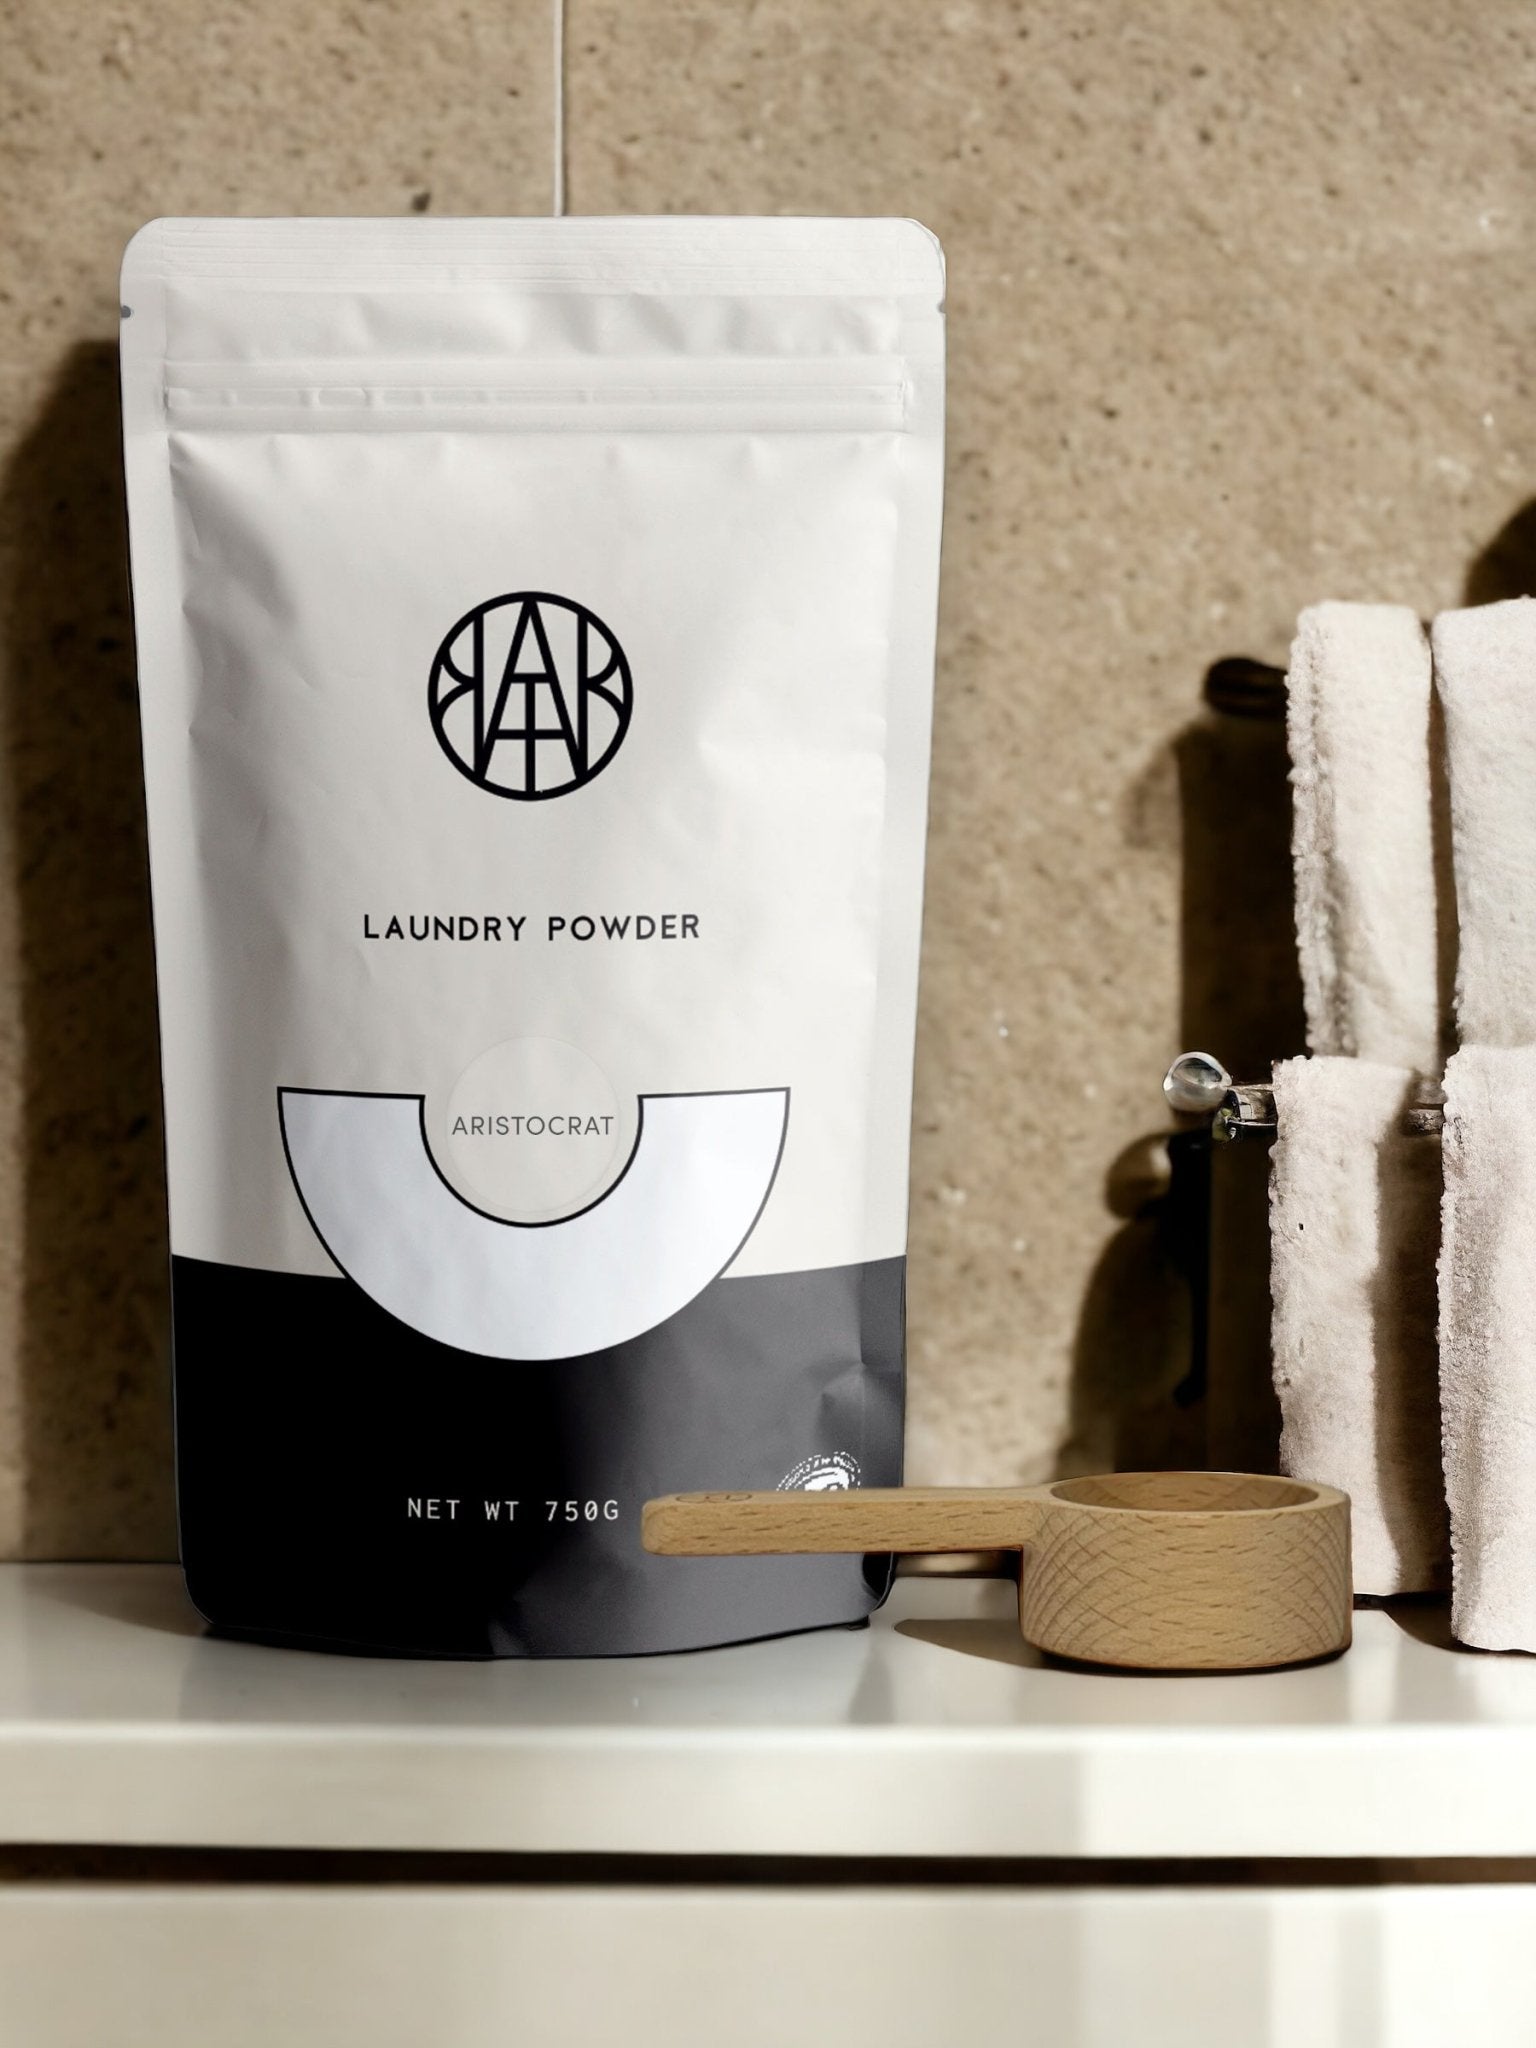 LAUNDRY STARTER PACK - AEMBR - Clean Luxury Candles, Wax Melts & Laundry Care